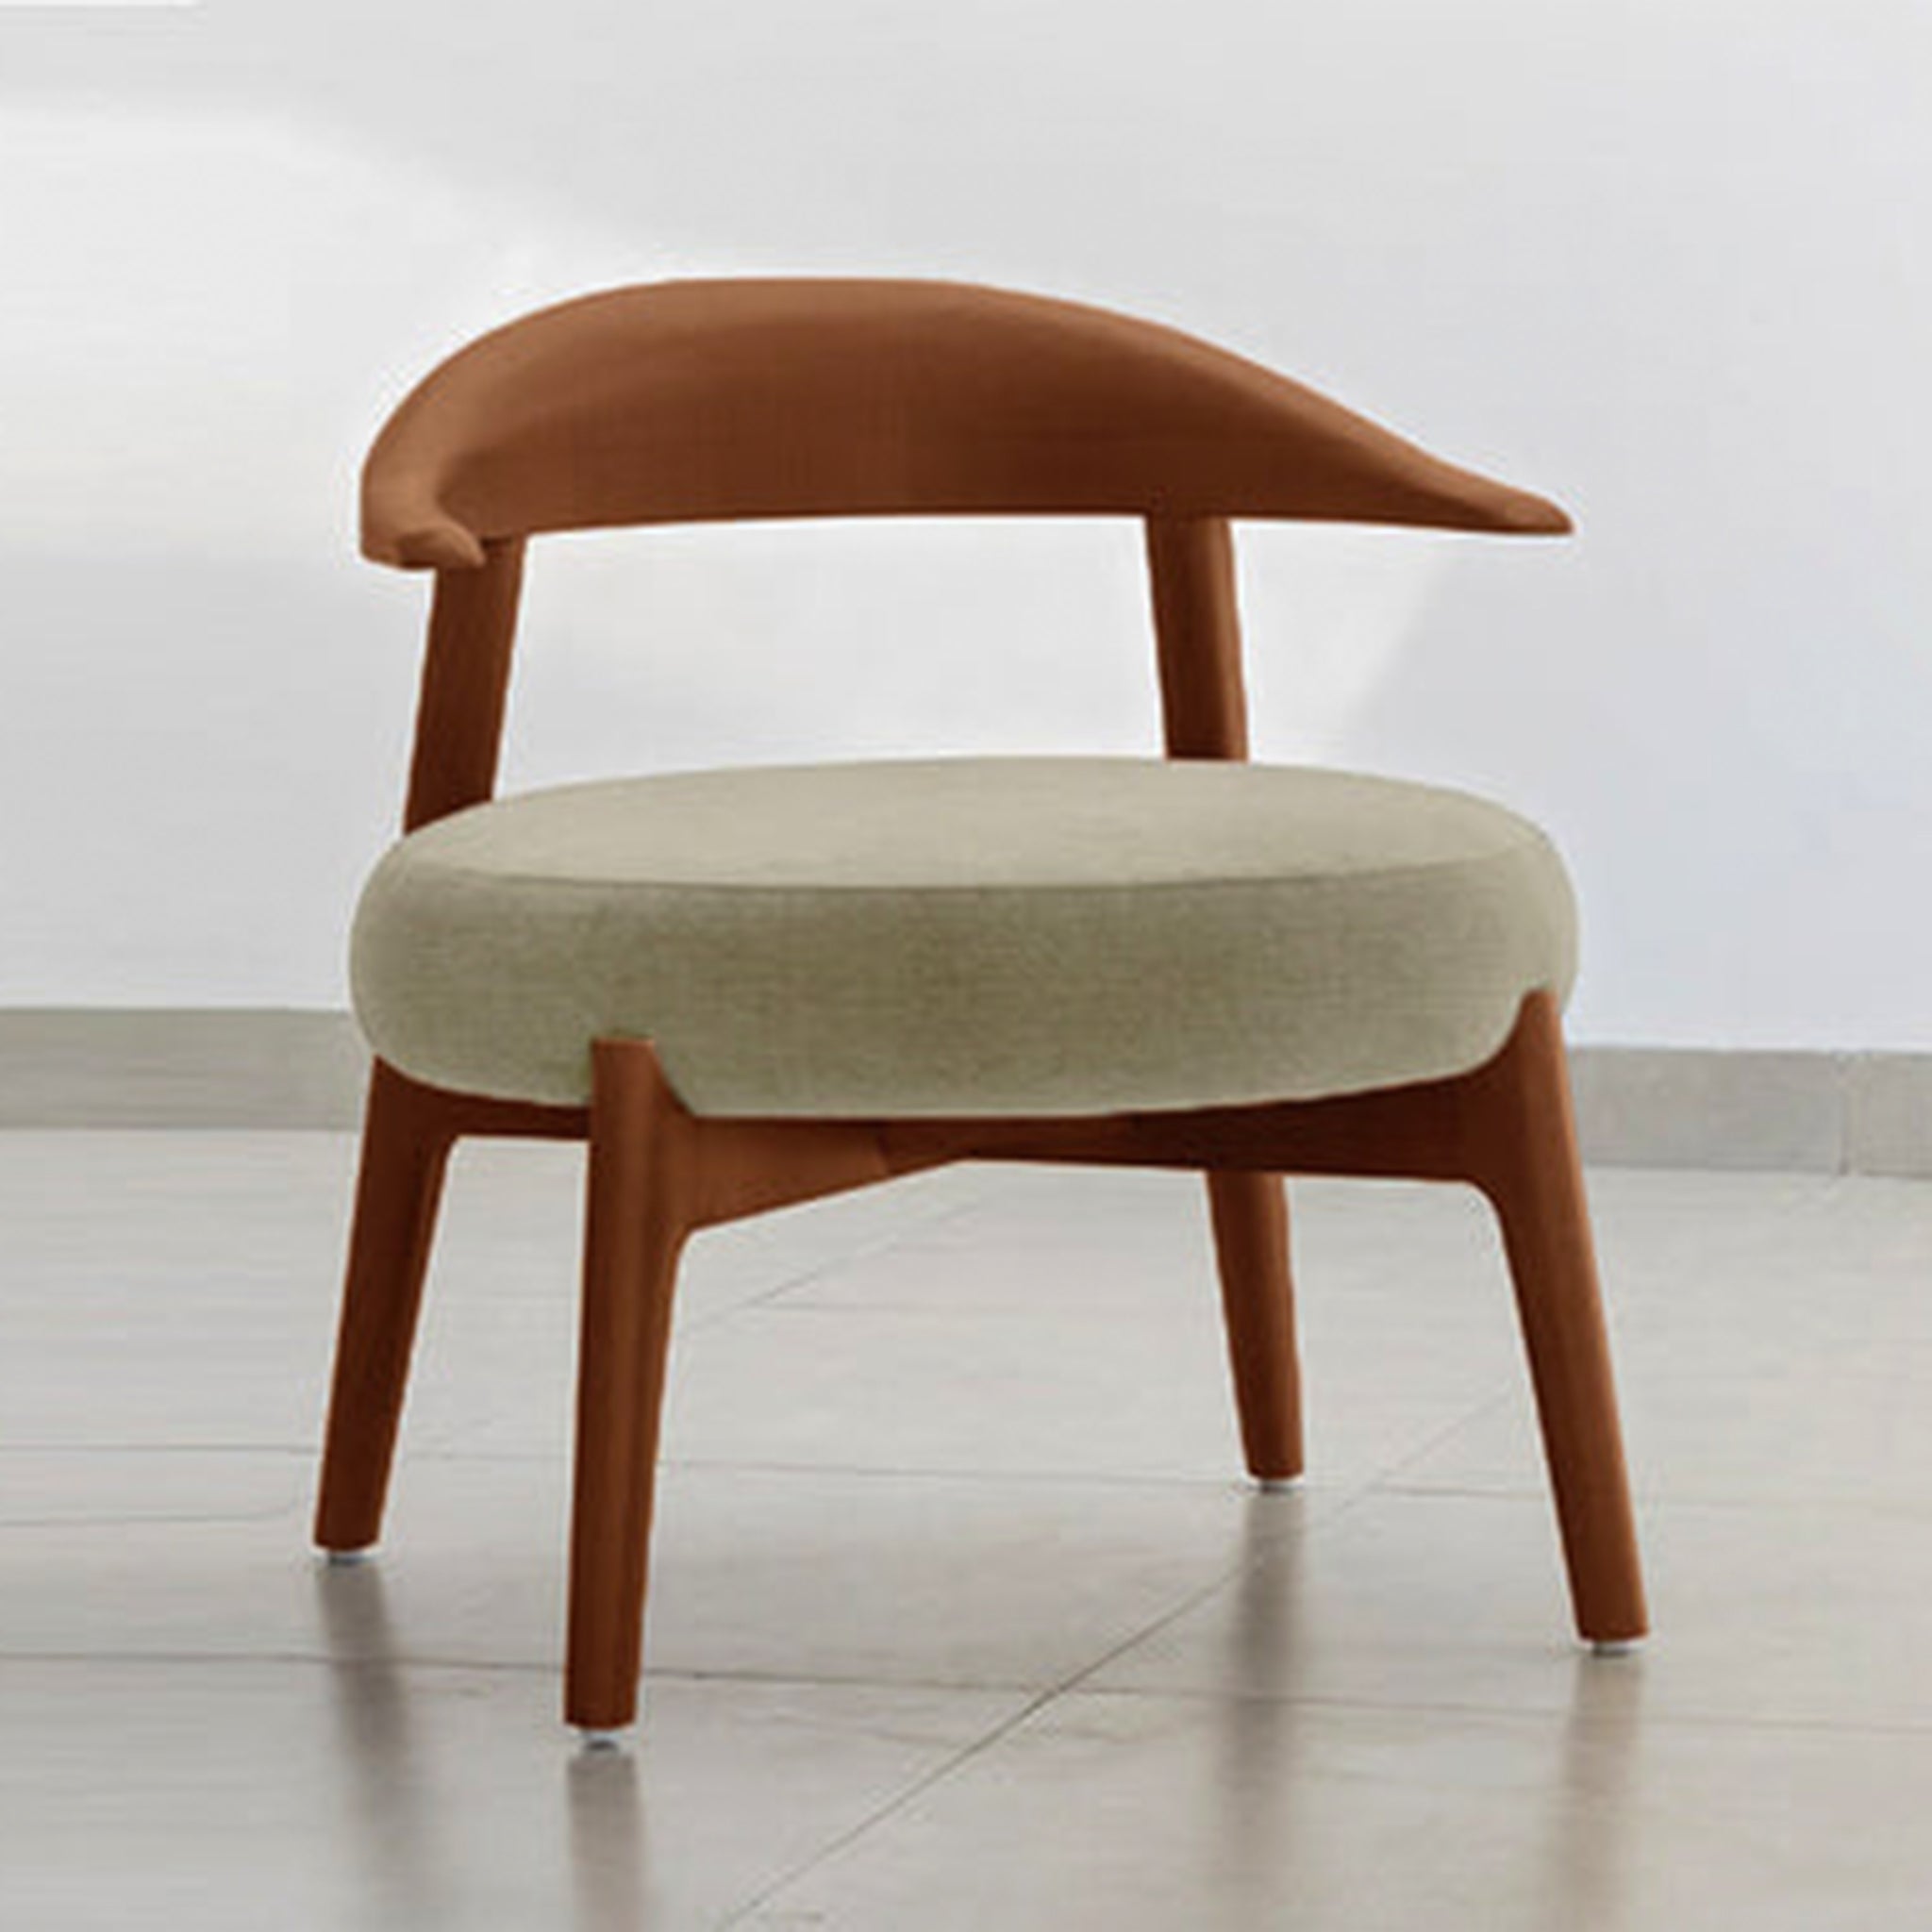 "The Hyde Accent Chair with elegant wooden frame and plush seating"